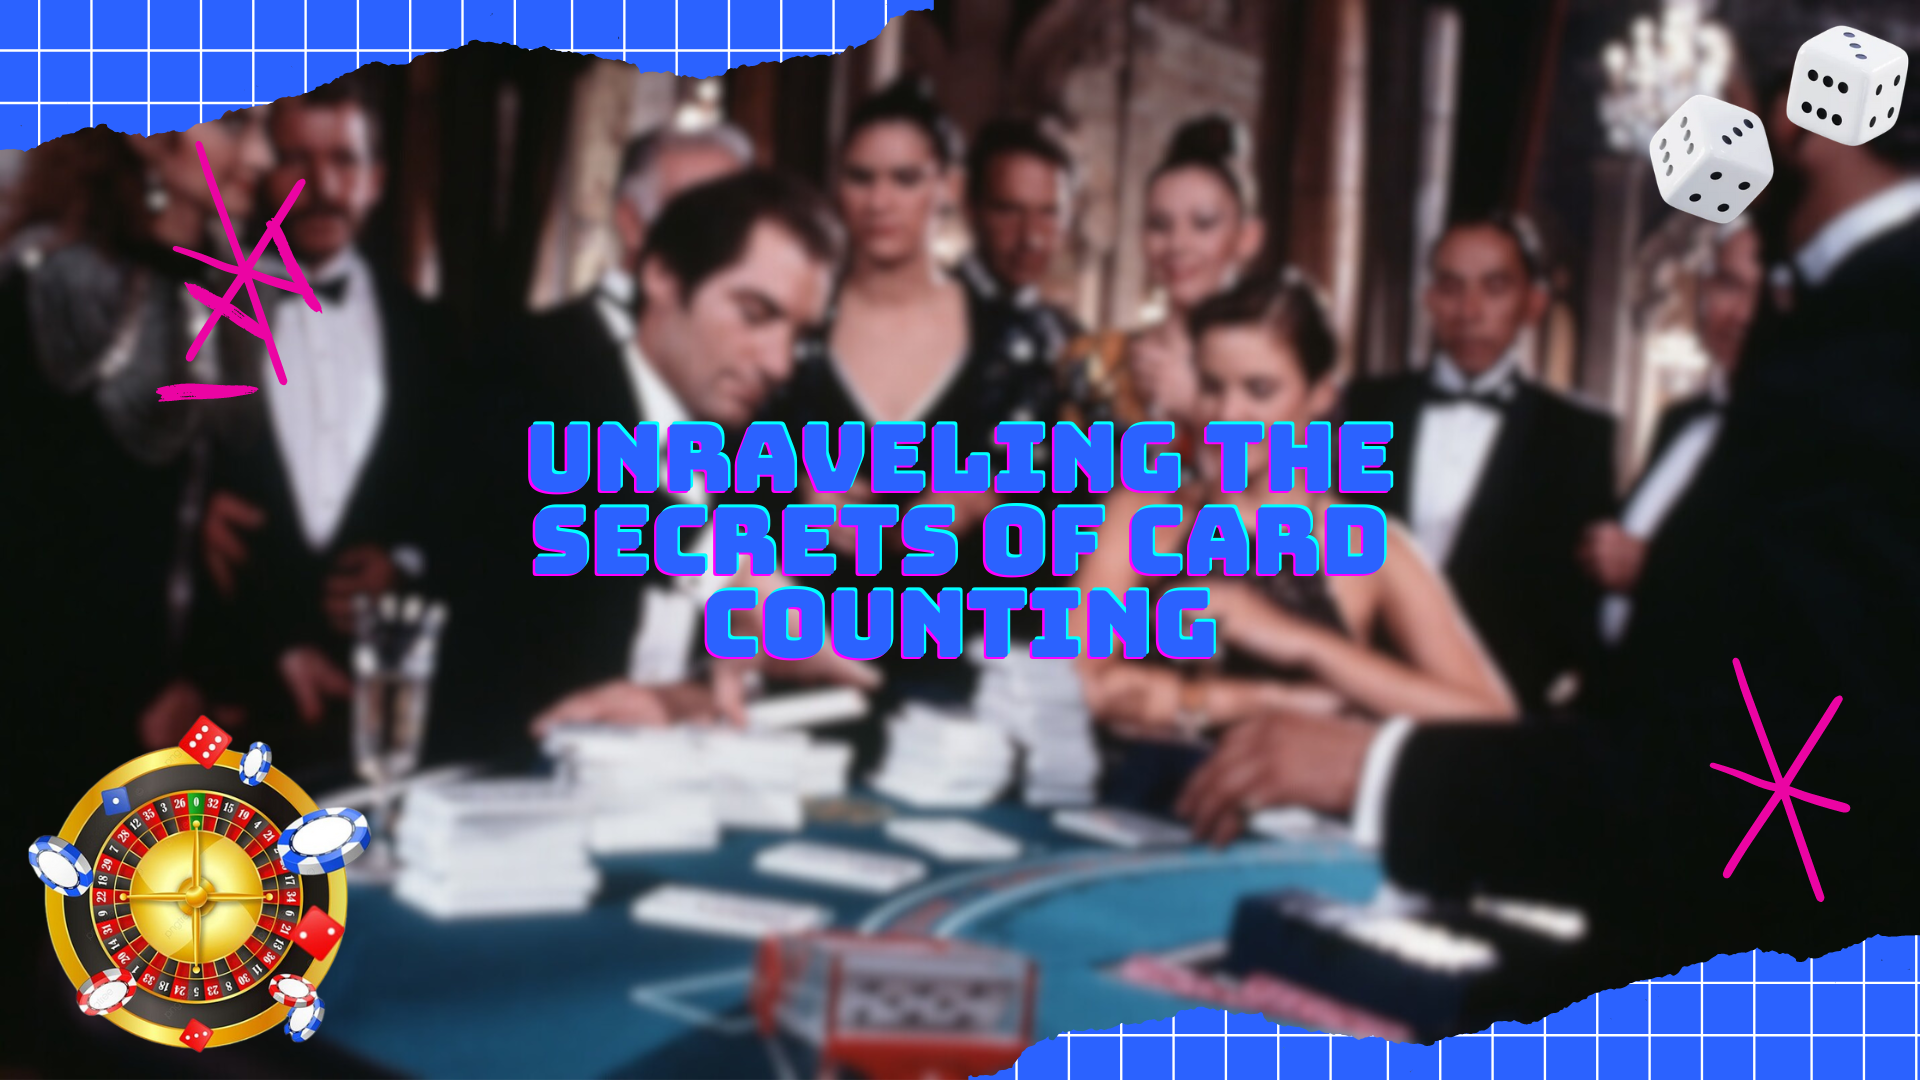 Unraveling the Secrets of Card Counting